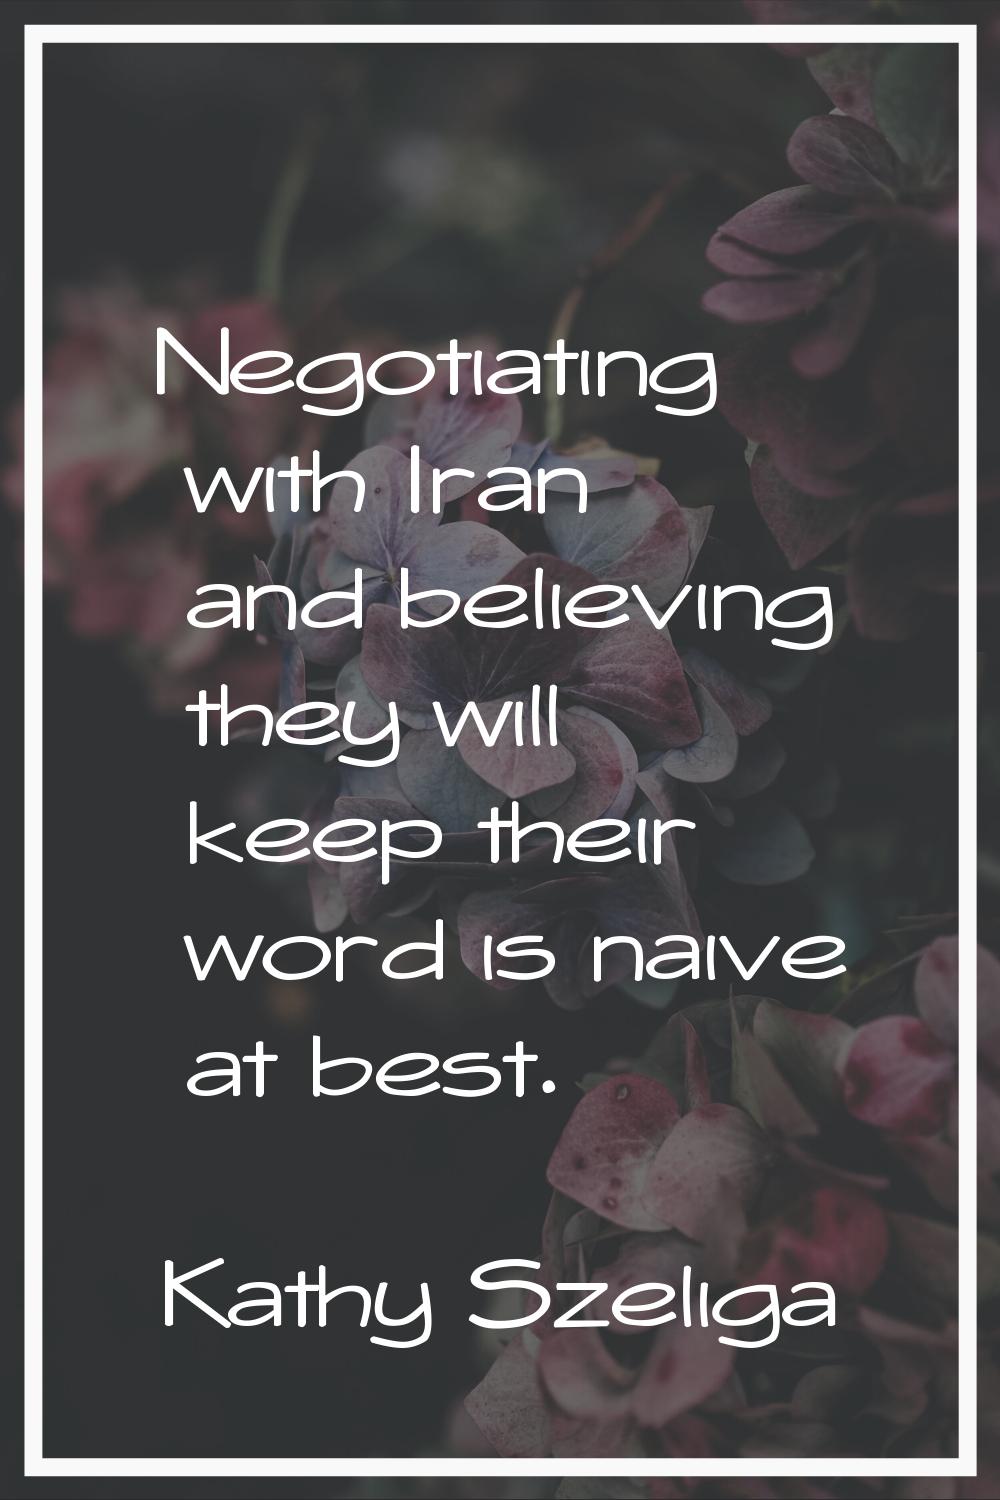 Negotiating with Iran and believing they will keep their word is naive at best.